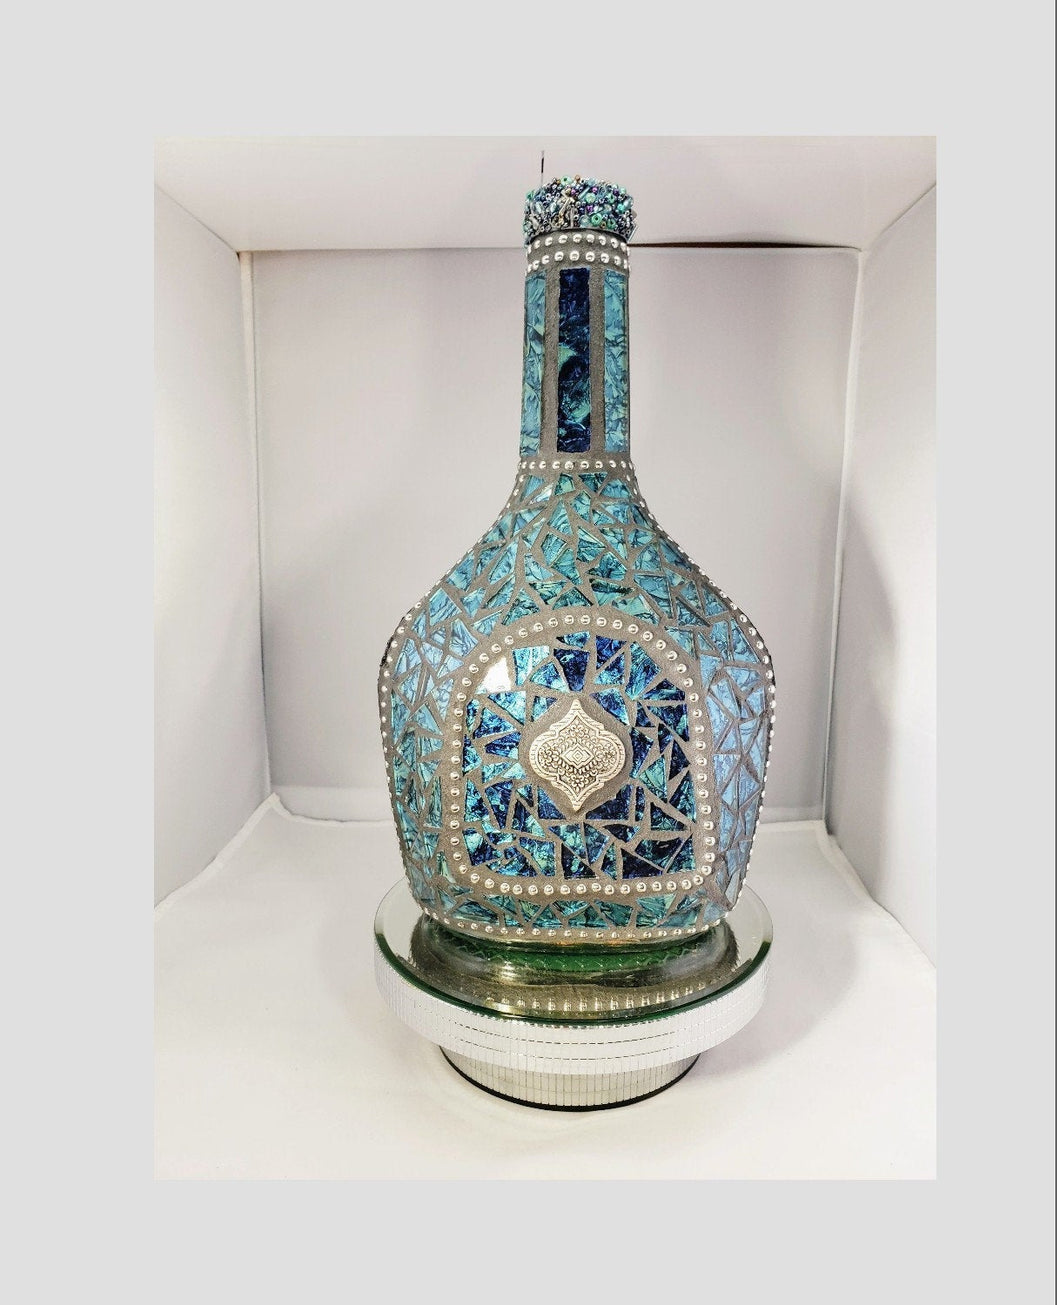 Mosaic  bottle with lots of color Beautiful W213